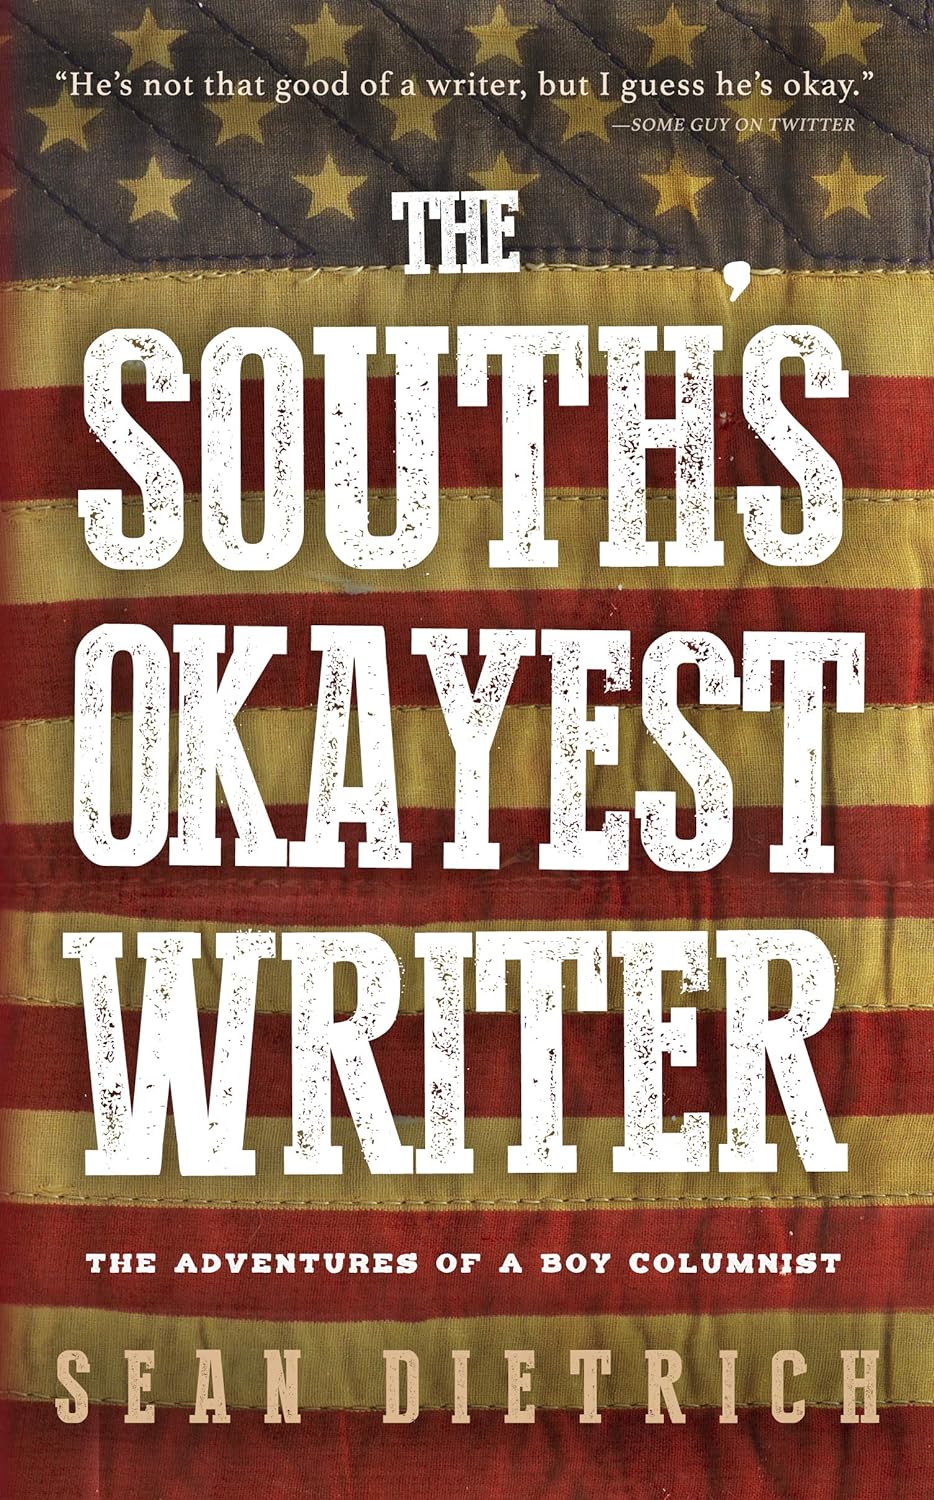 The South’s Okayest Writer by Sean Dietrich